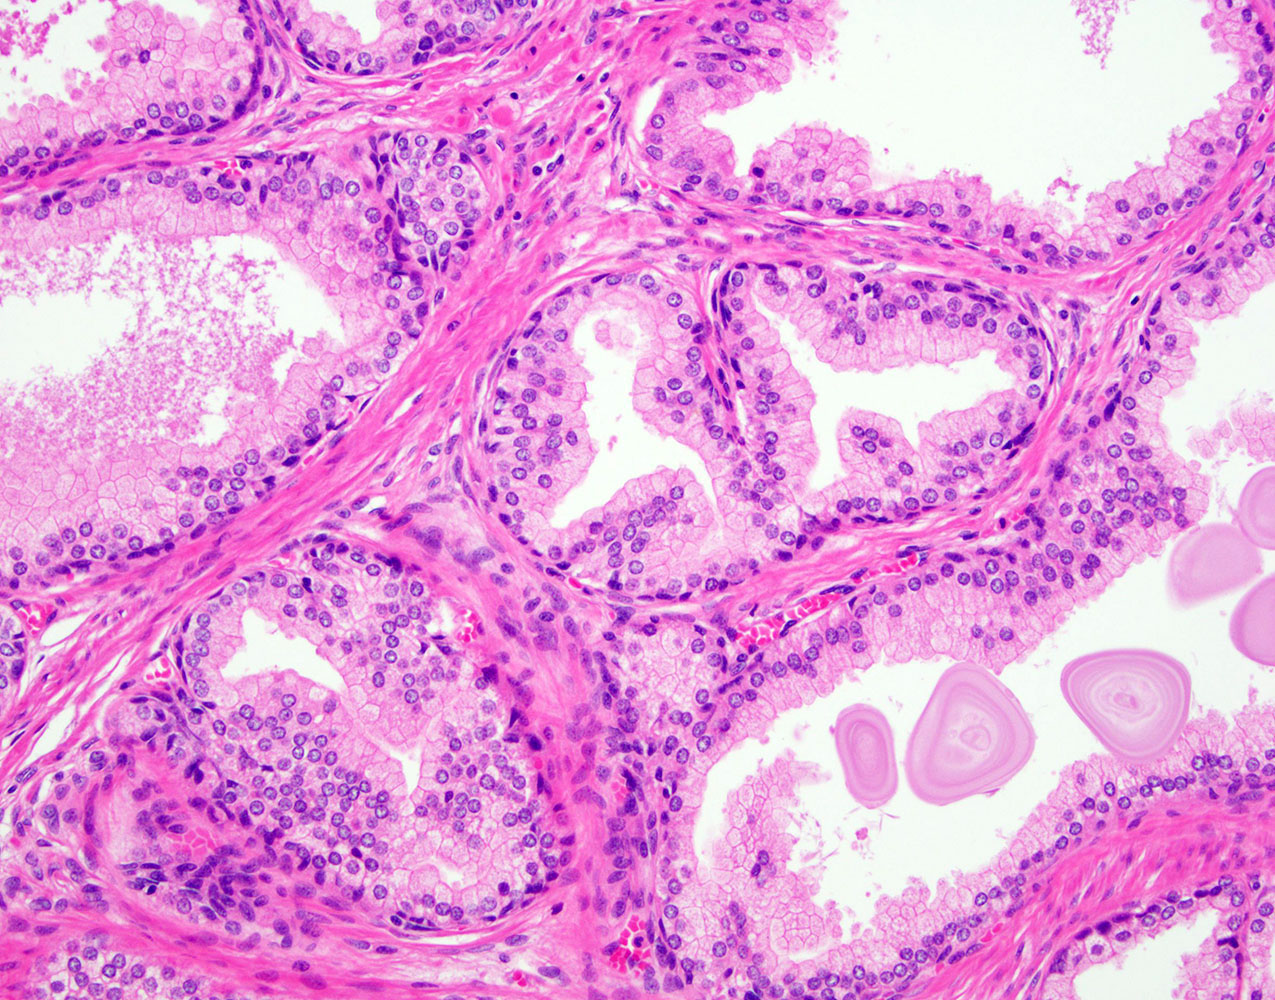 basal cell hyperplasia prostate pathology outlines